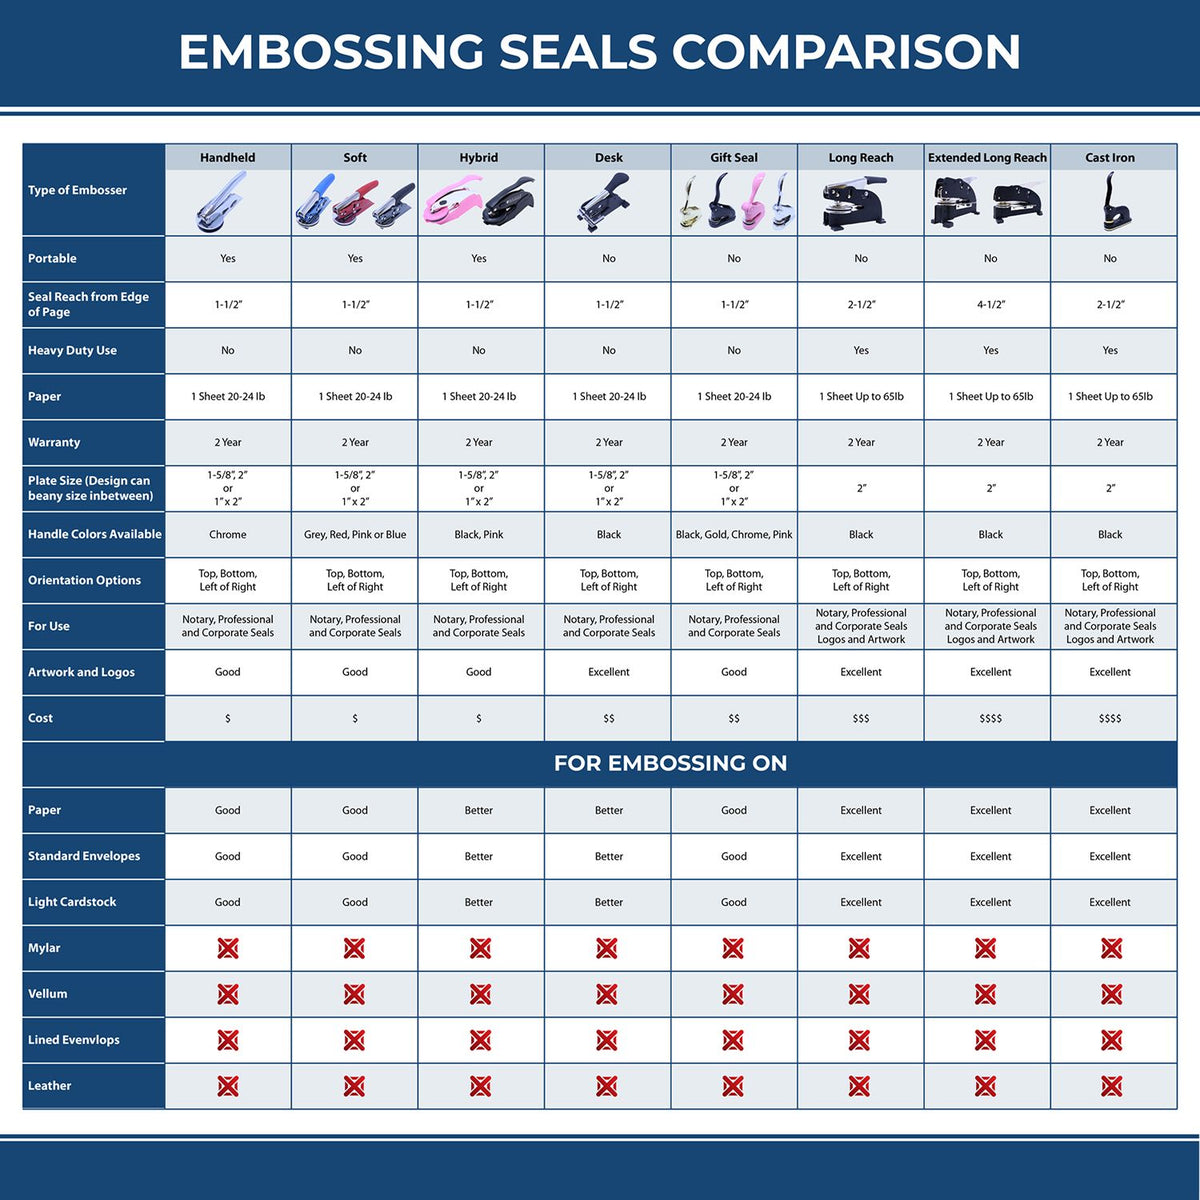 A comparison chart for the different types of mount models available for the Heavy Duty Cast Iron Oregon Geologist Seal Embosser